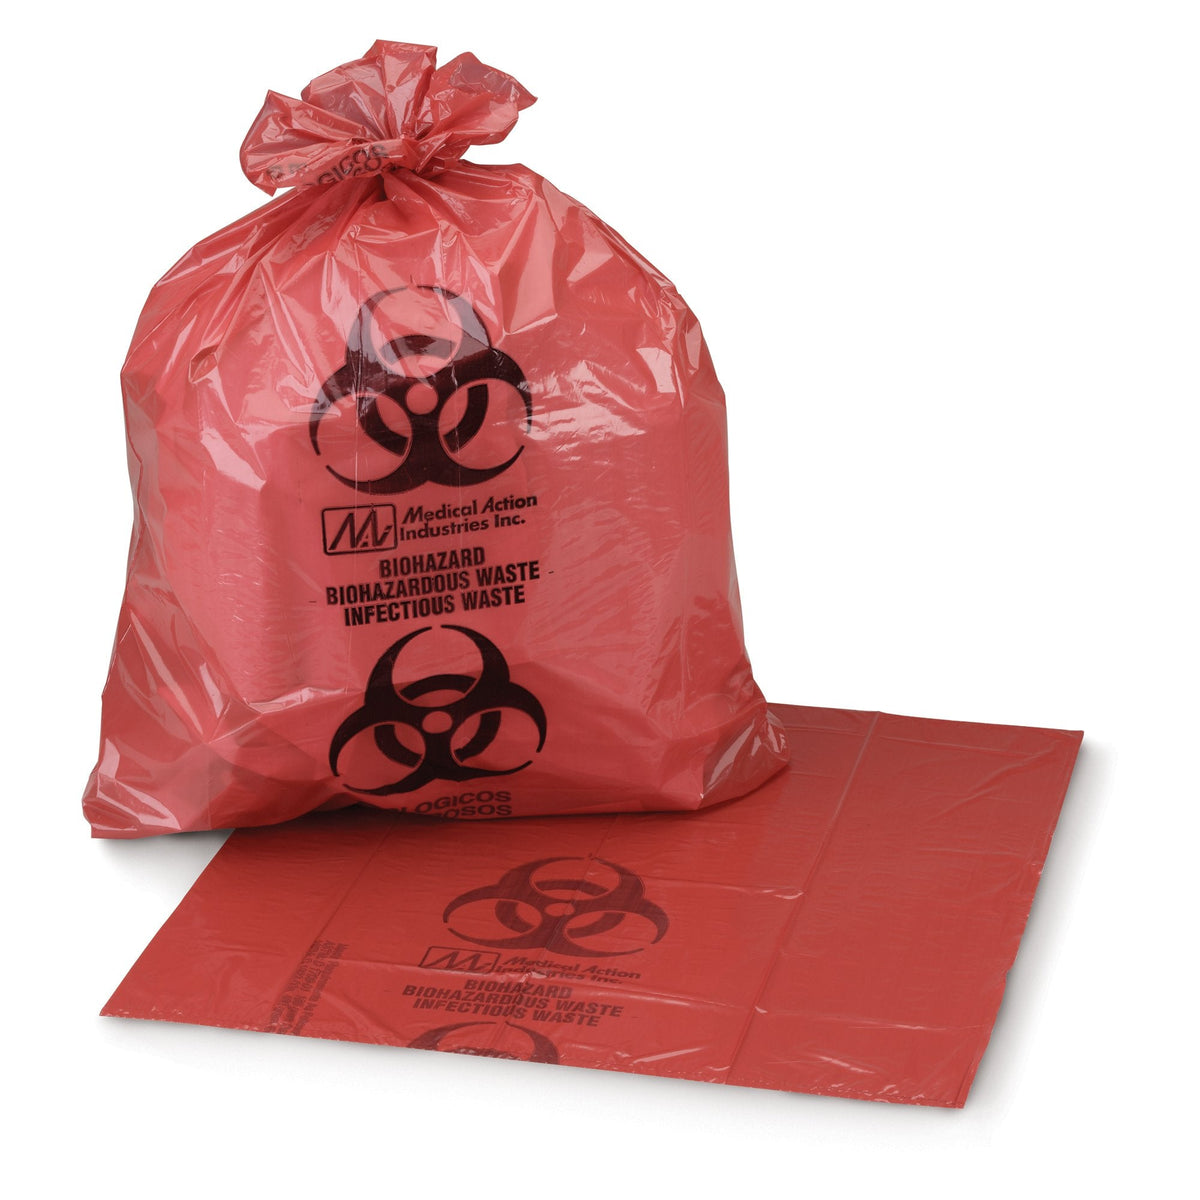 Infectious Waste Bag 10 to 15 gal. Red Bag 24 X 32 Inch - American Hospital Supply